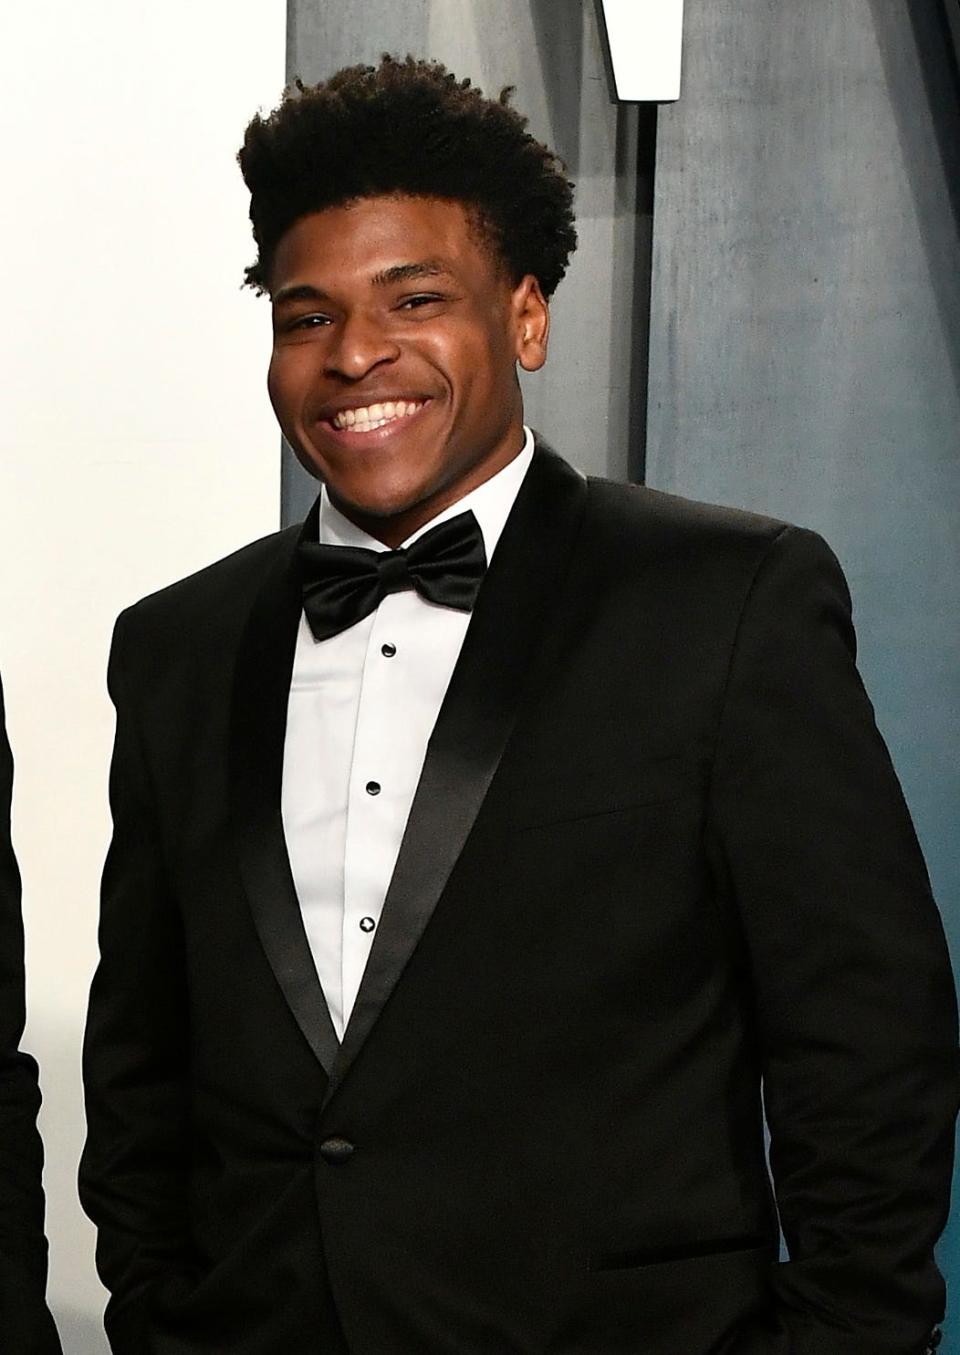 "Cheer" star Jerry Harris' popularity with viewers following the debut of the Netflix series scored the cheerleader an invite to Vanity Fair's Oscar Party on Feb. 9, 2020 in Beverly Hills.